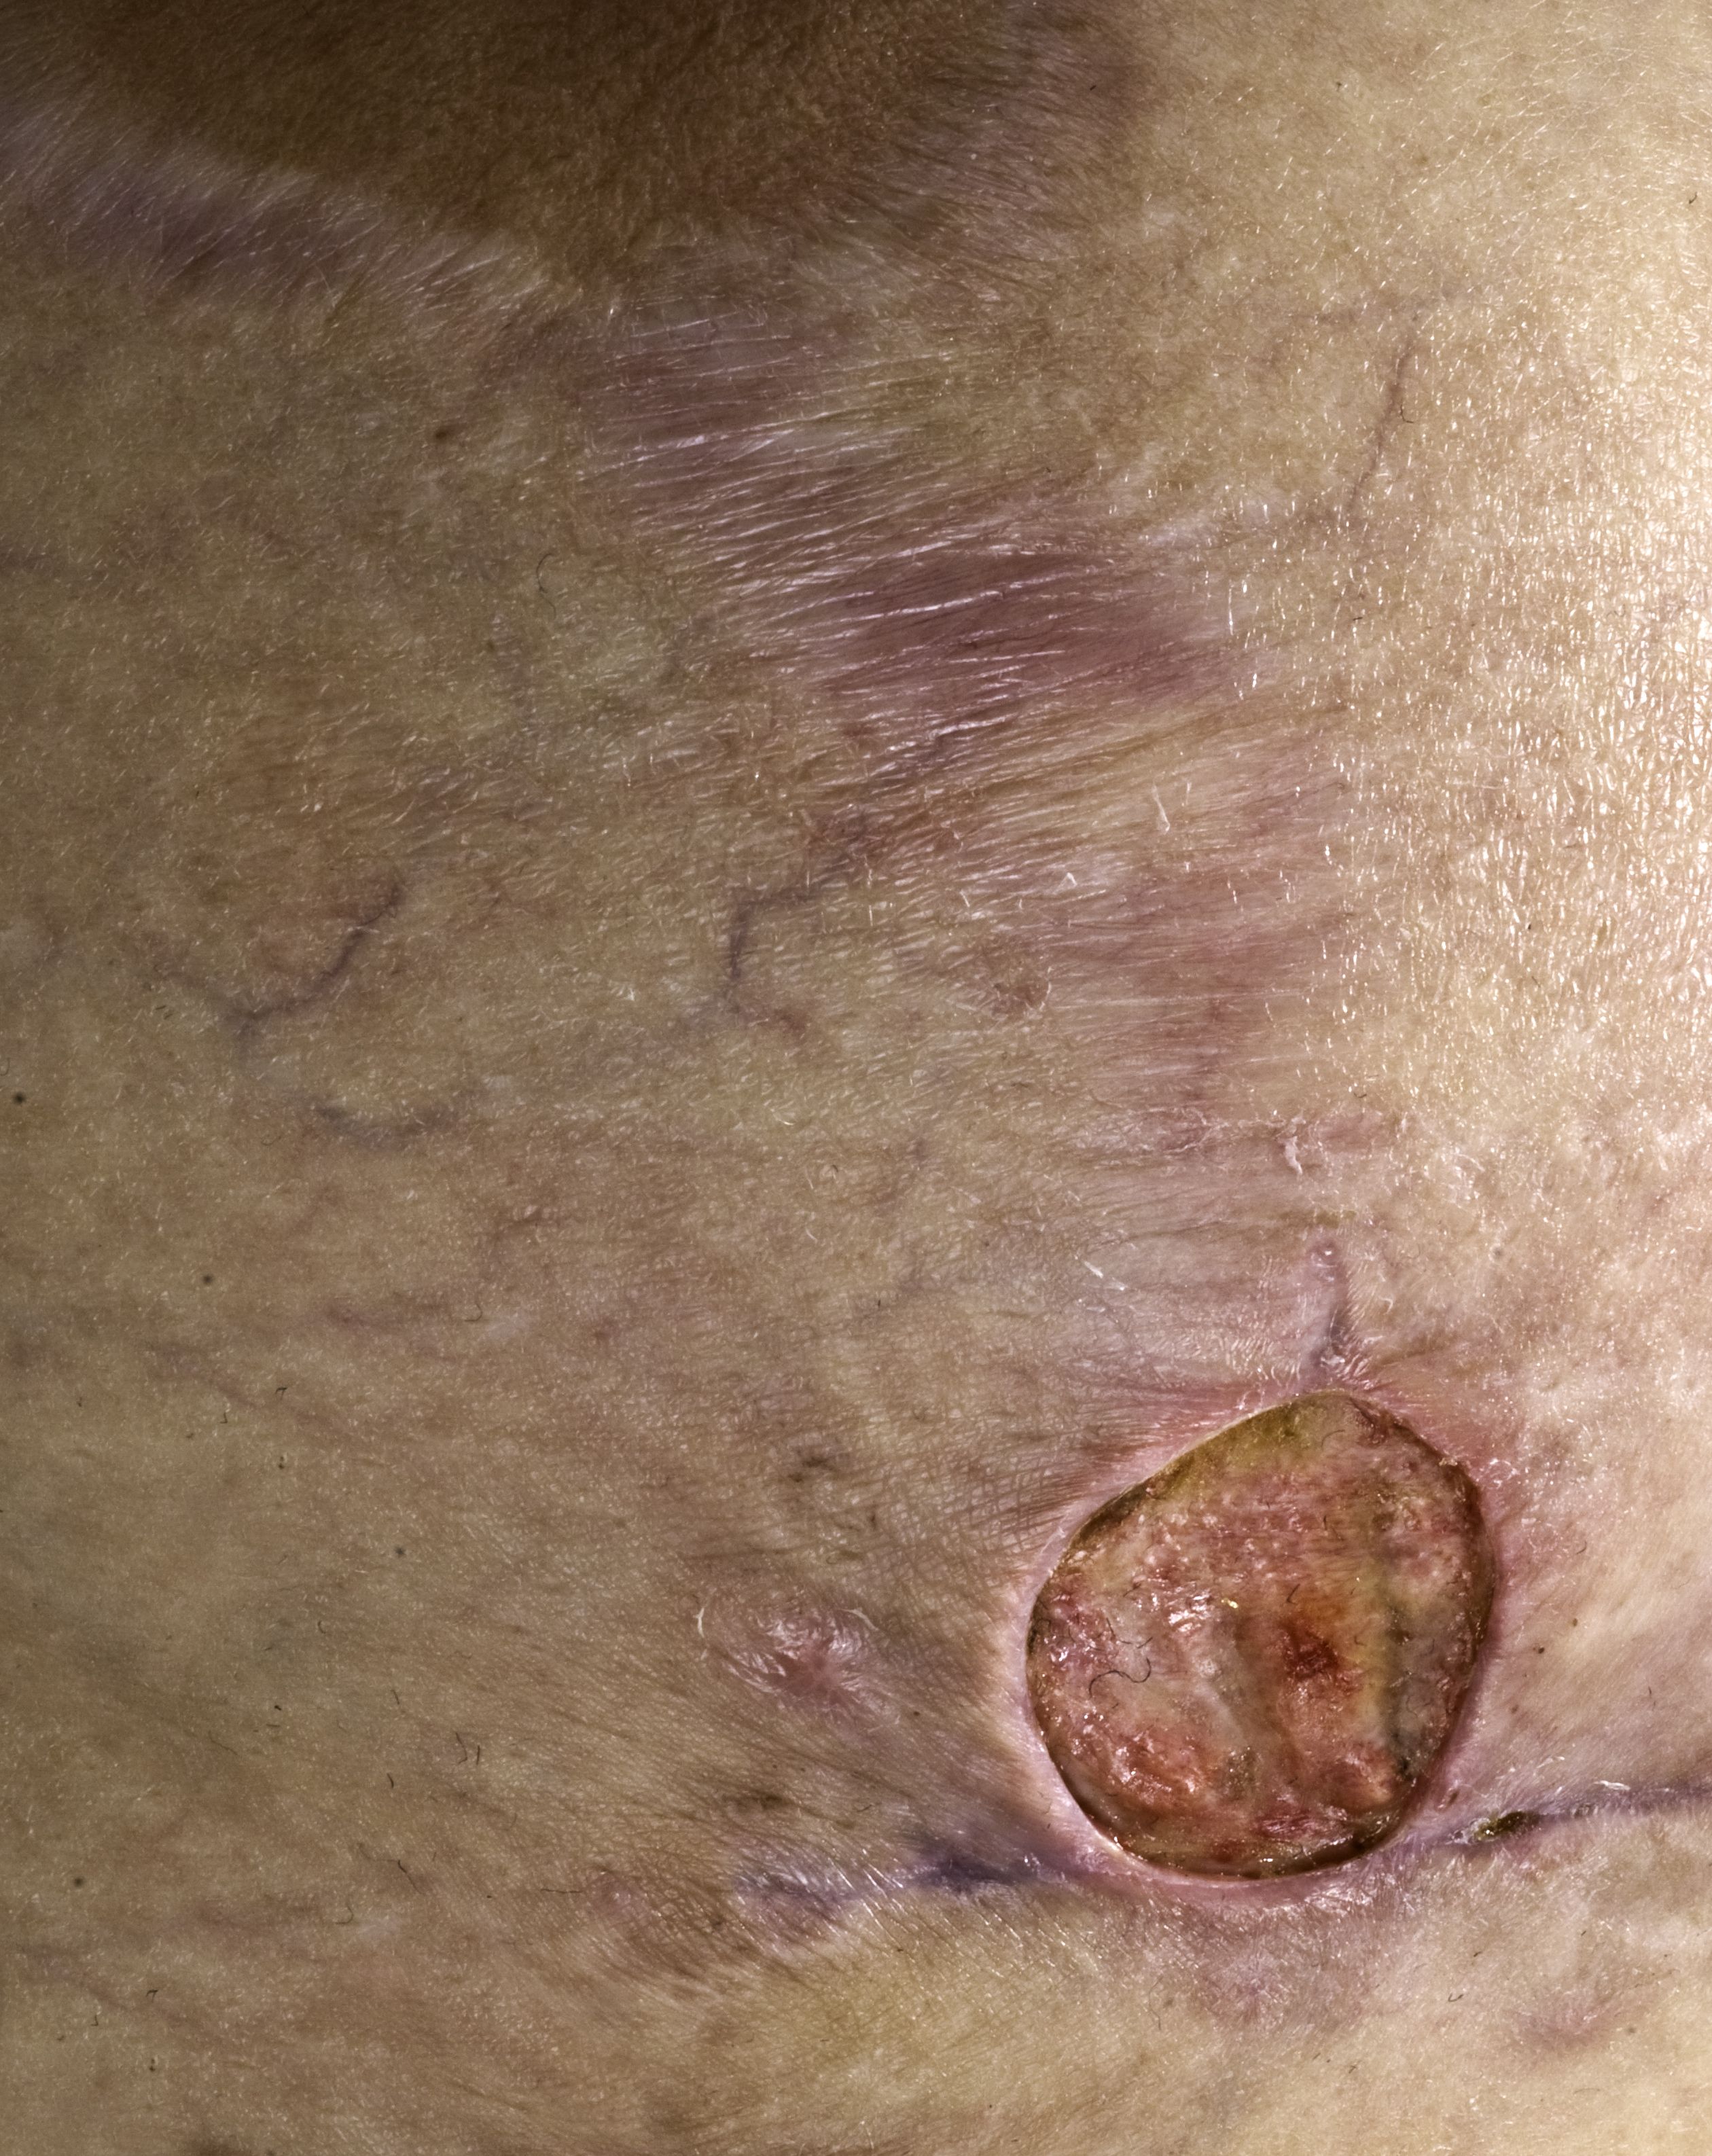 Is That A Brown Recluse Spider Bite Or Skin Cancer?